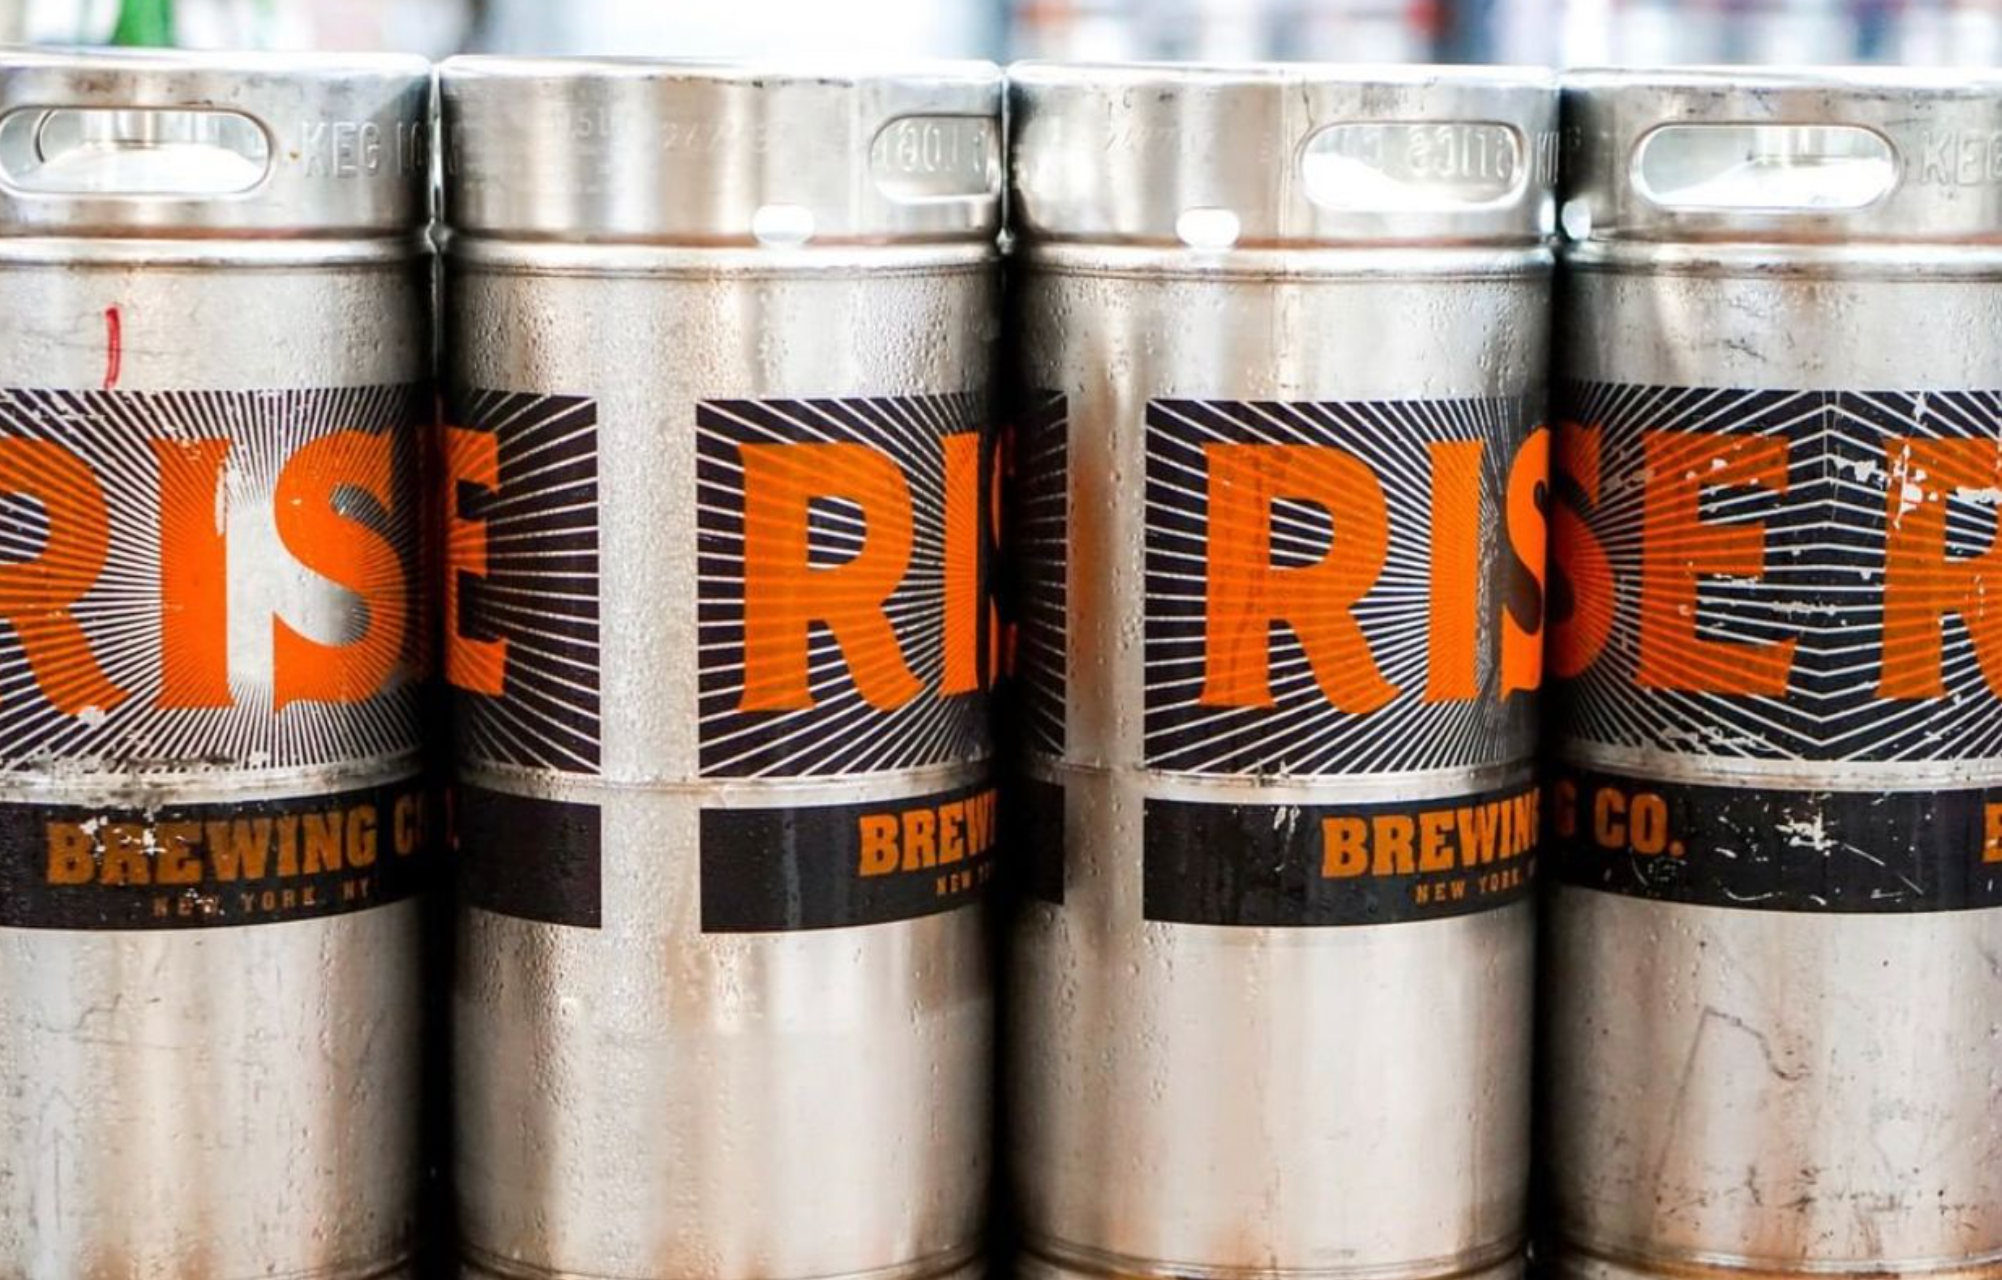 RISE Brewing Co. Nitro Cold Brew Kegs